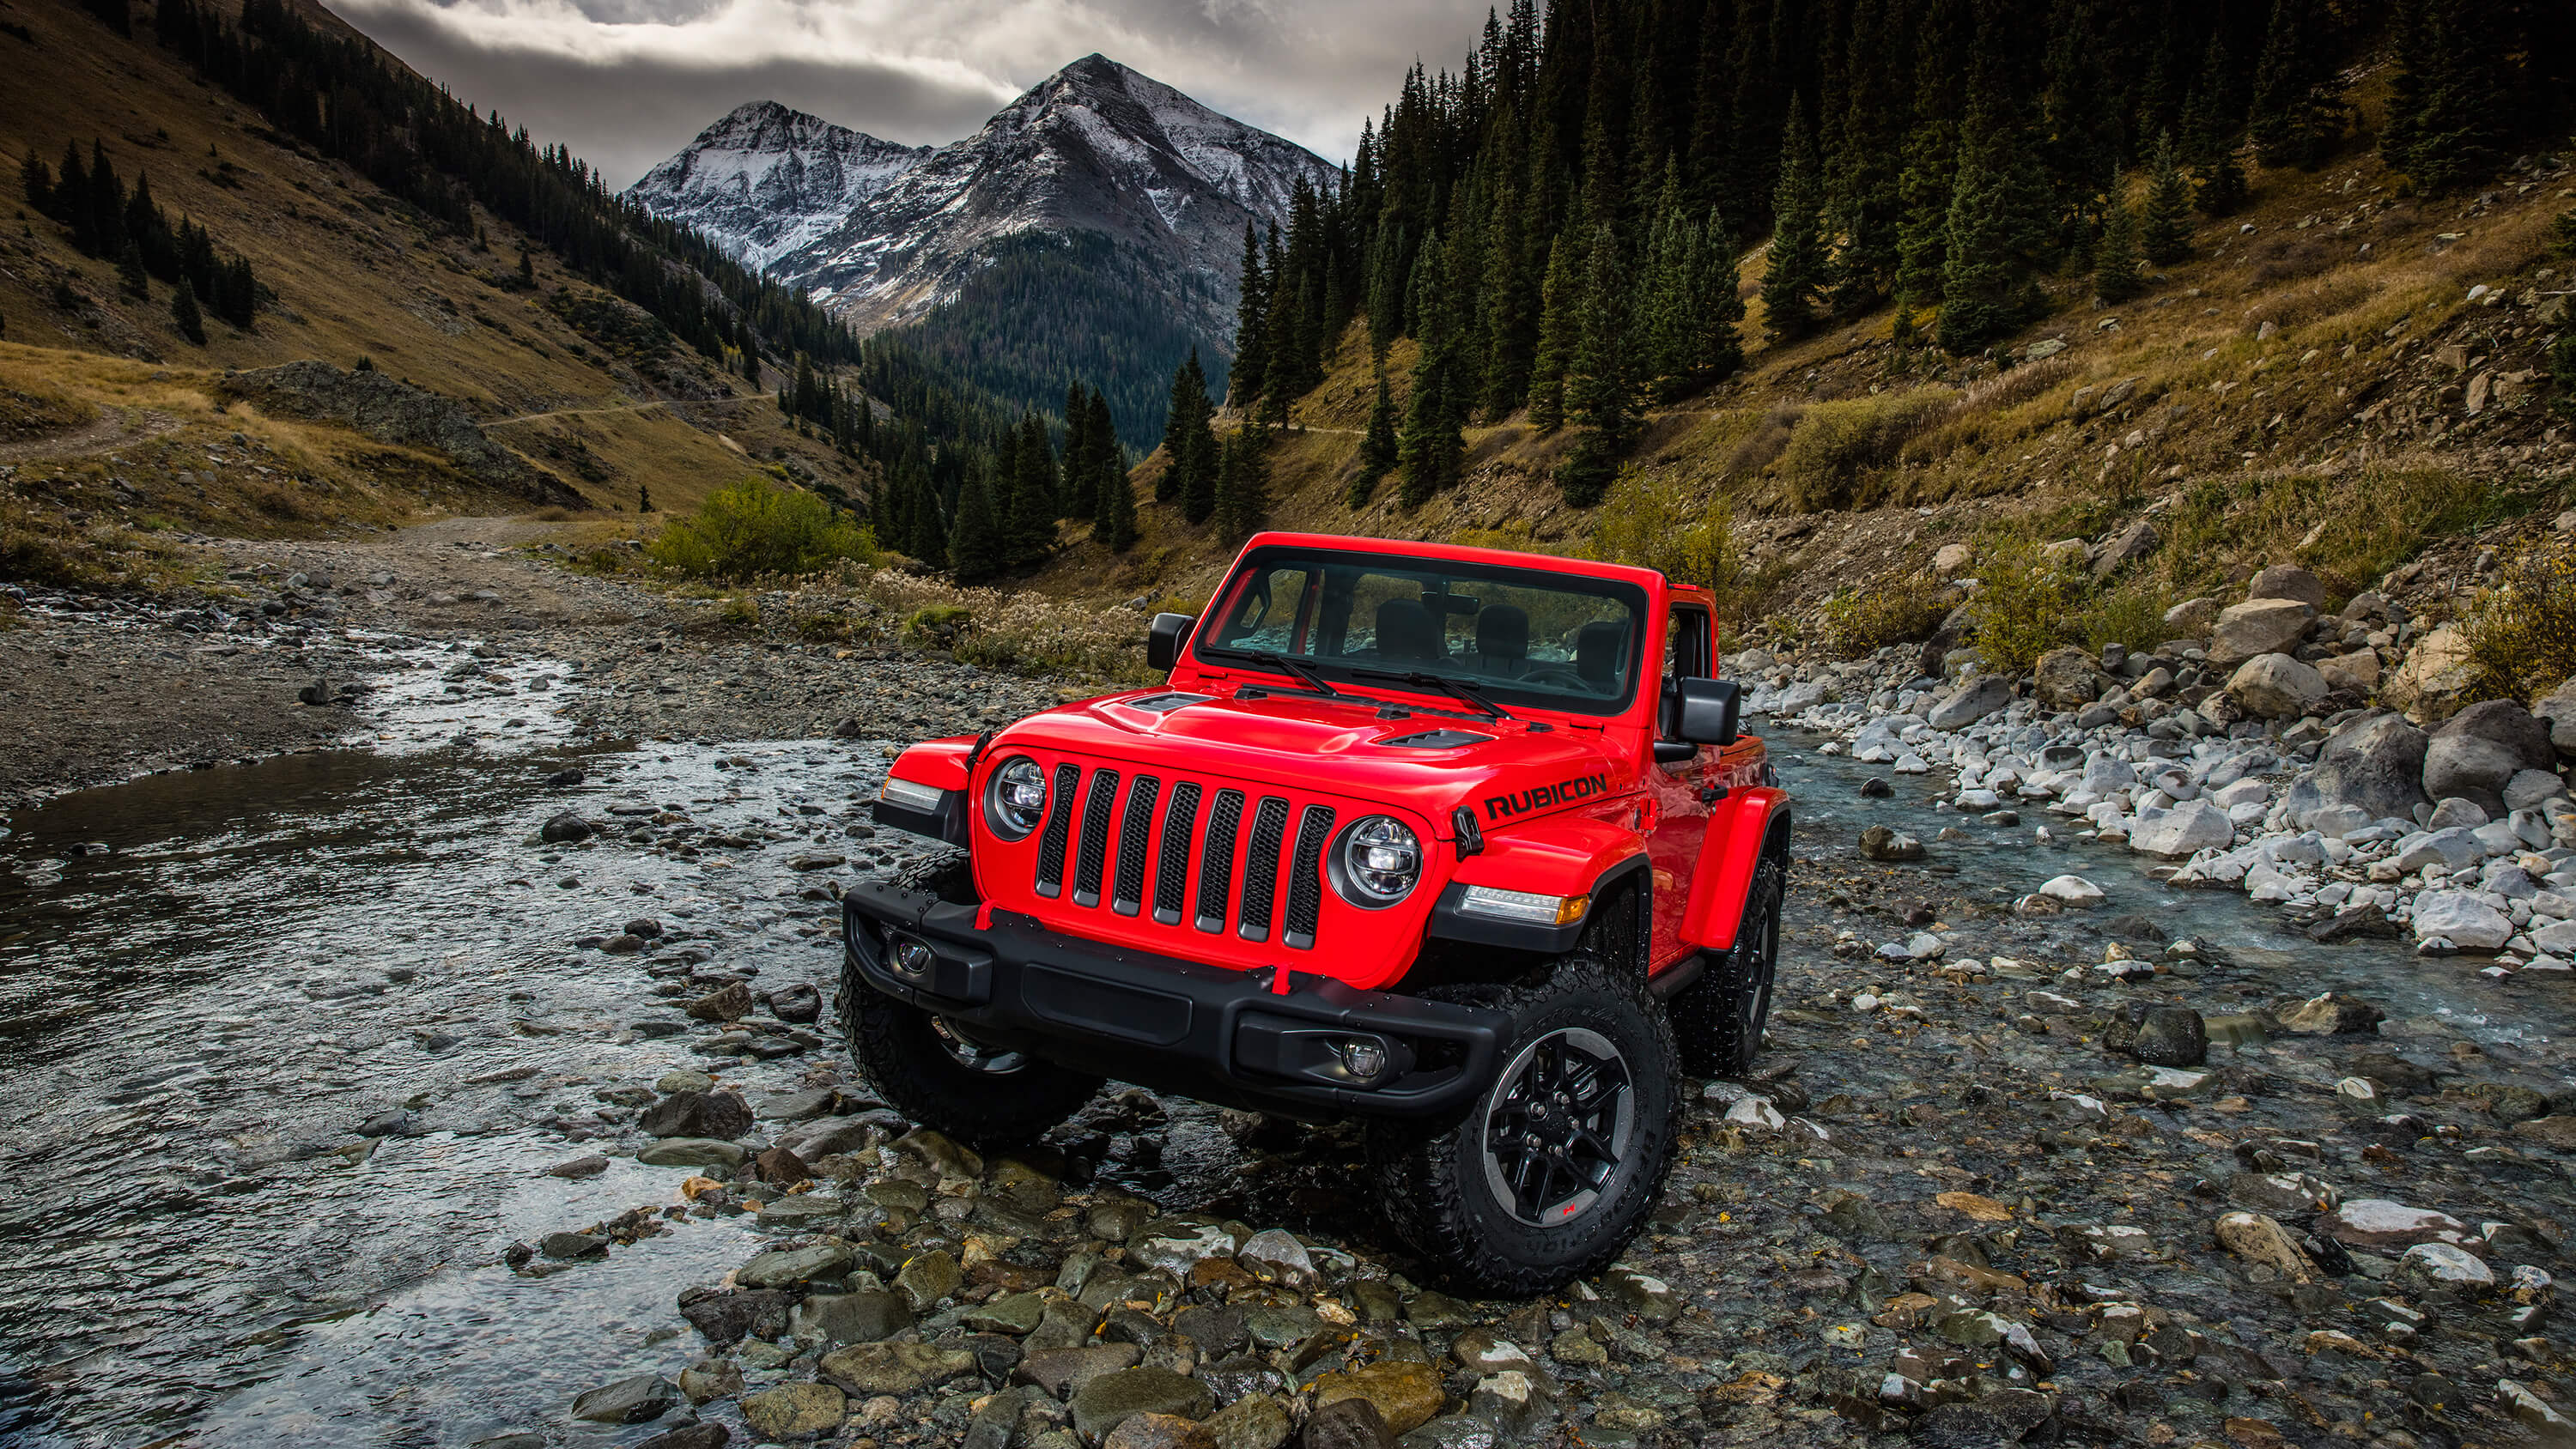 Red Jeep Wrangler Widescreen Wallpaper 65133 3000x1688px